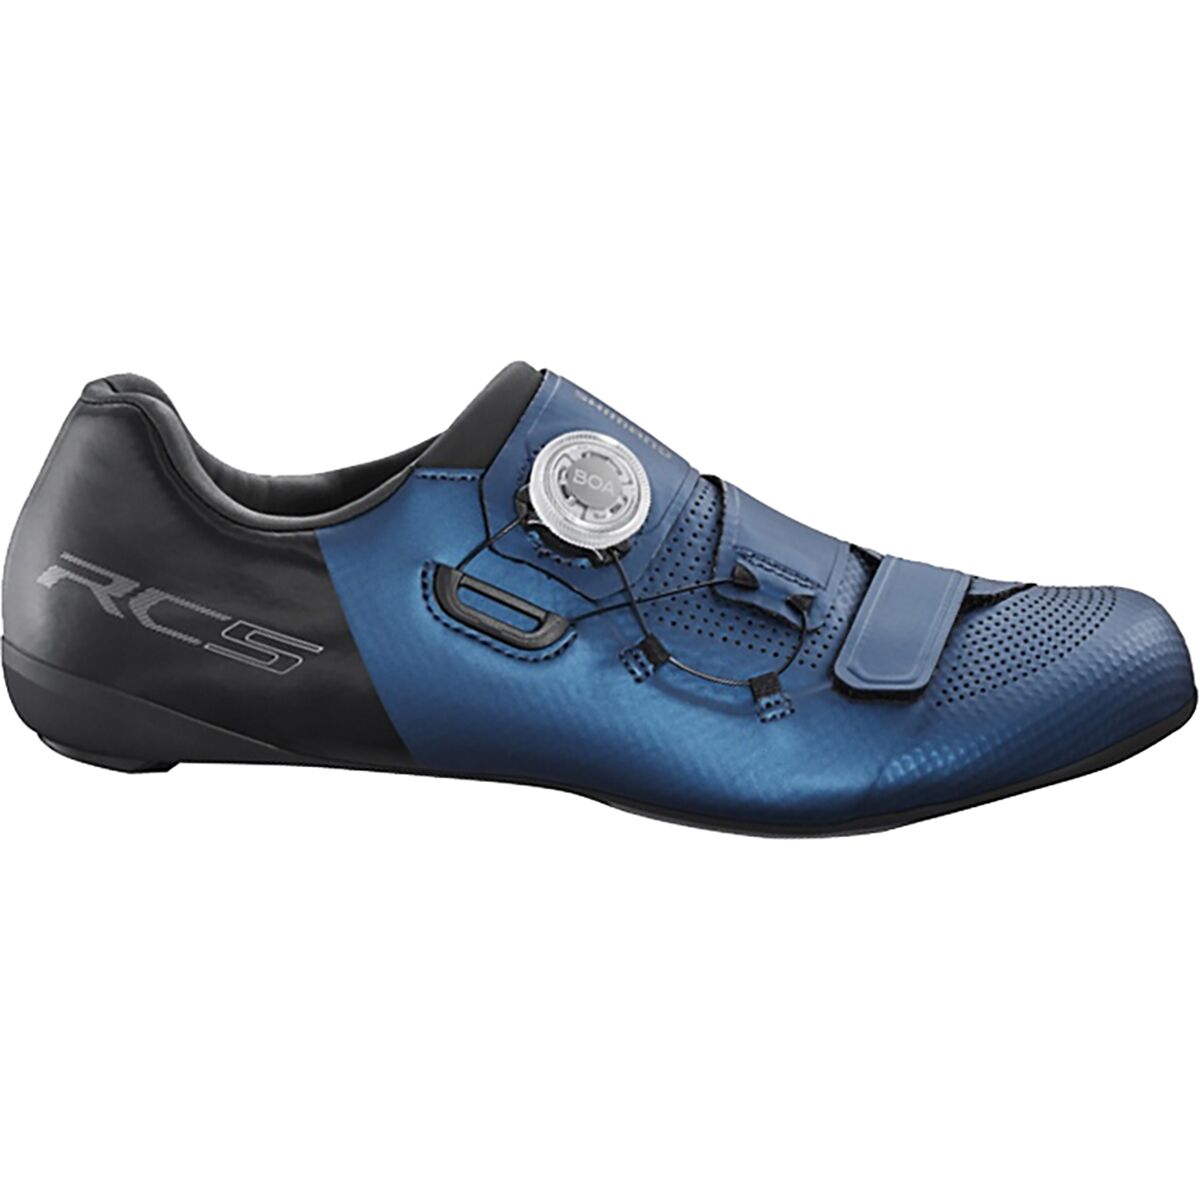 Shimano RC5 Limited Edition Cycling Shoe - Men's